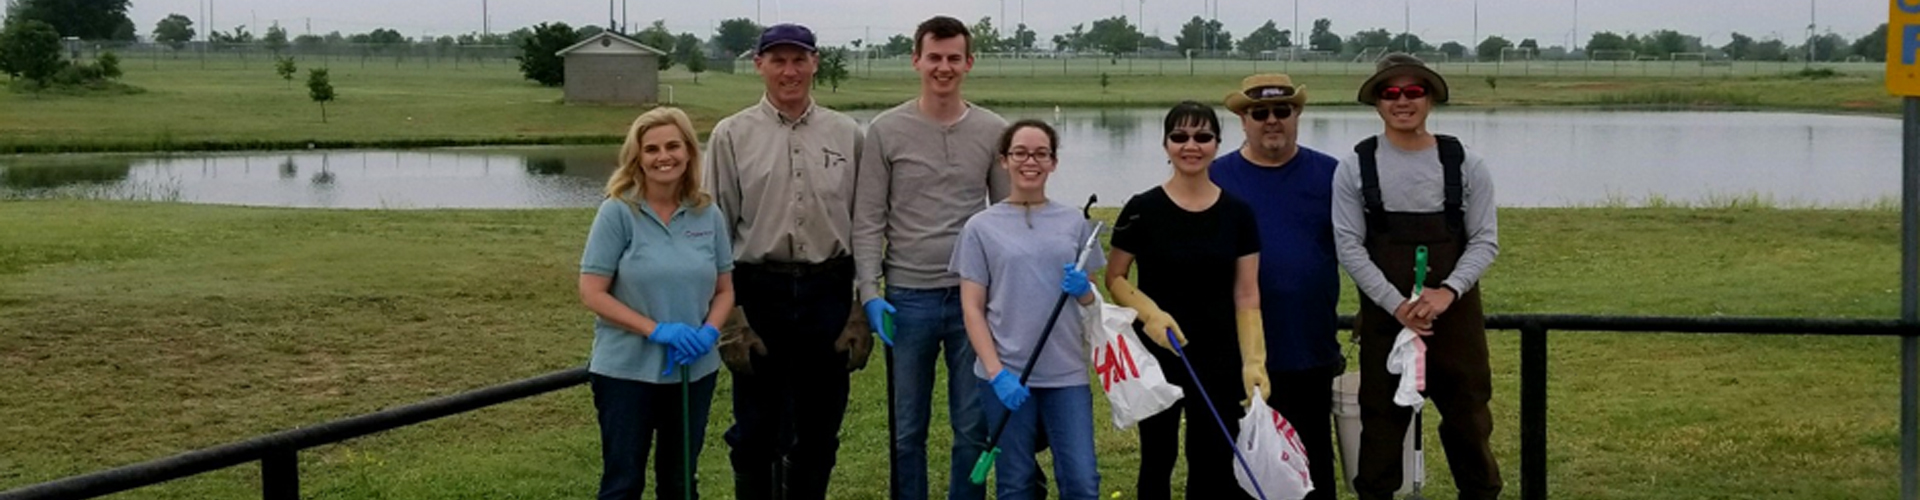 Hitachi Group Companies Clean Up Local Communities